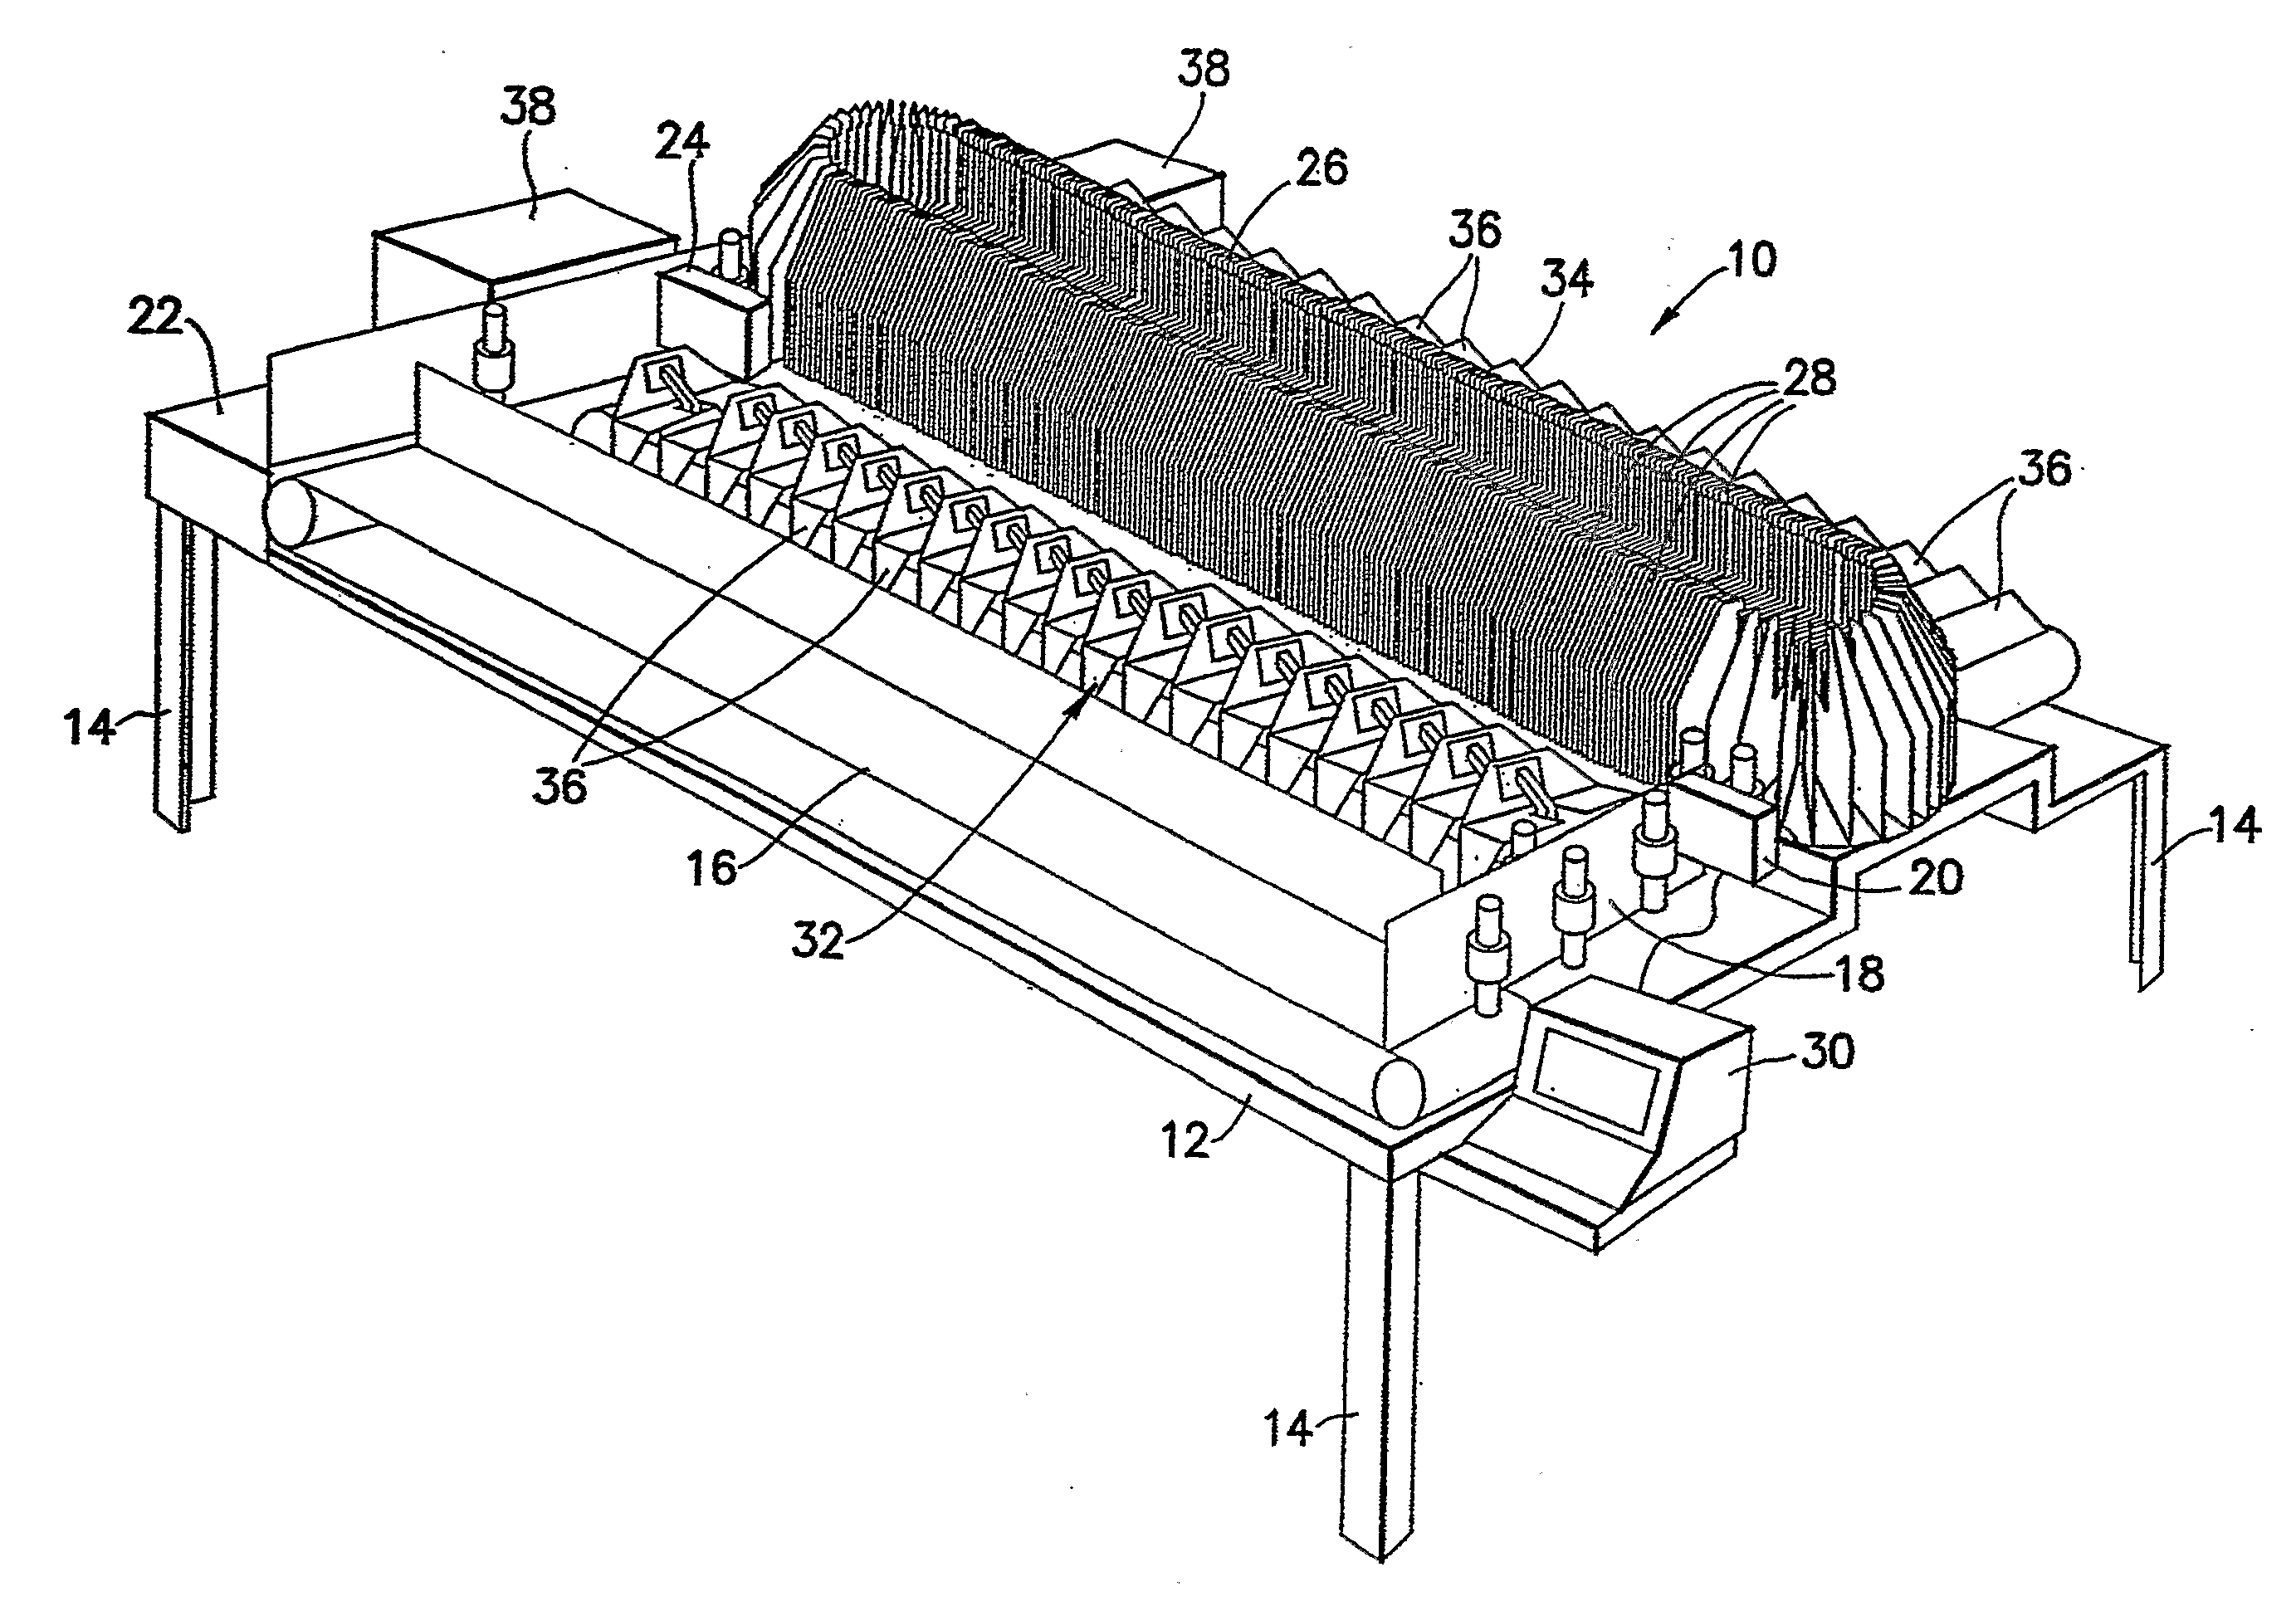 One-Pass Carrier Delivery Sequence Sorter